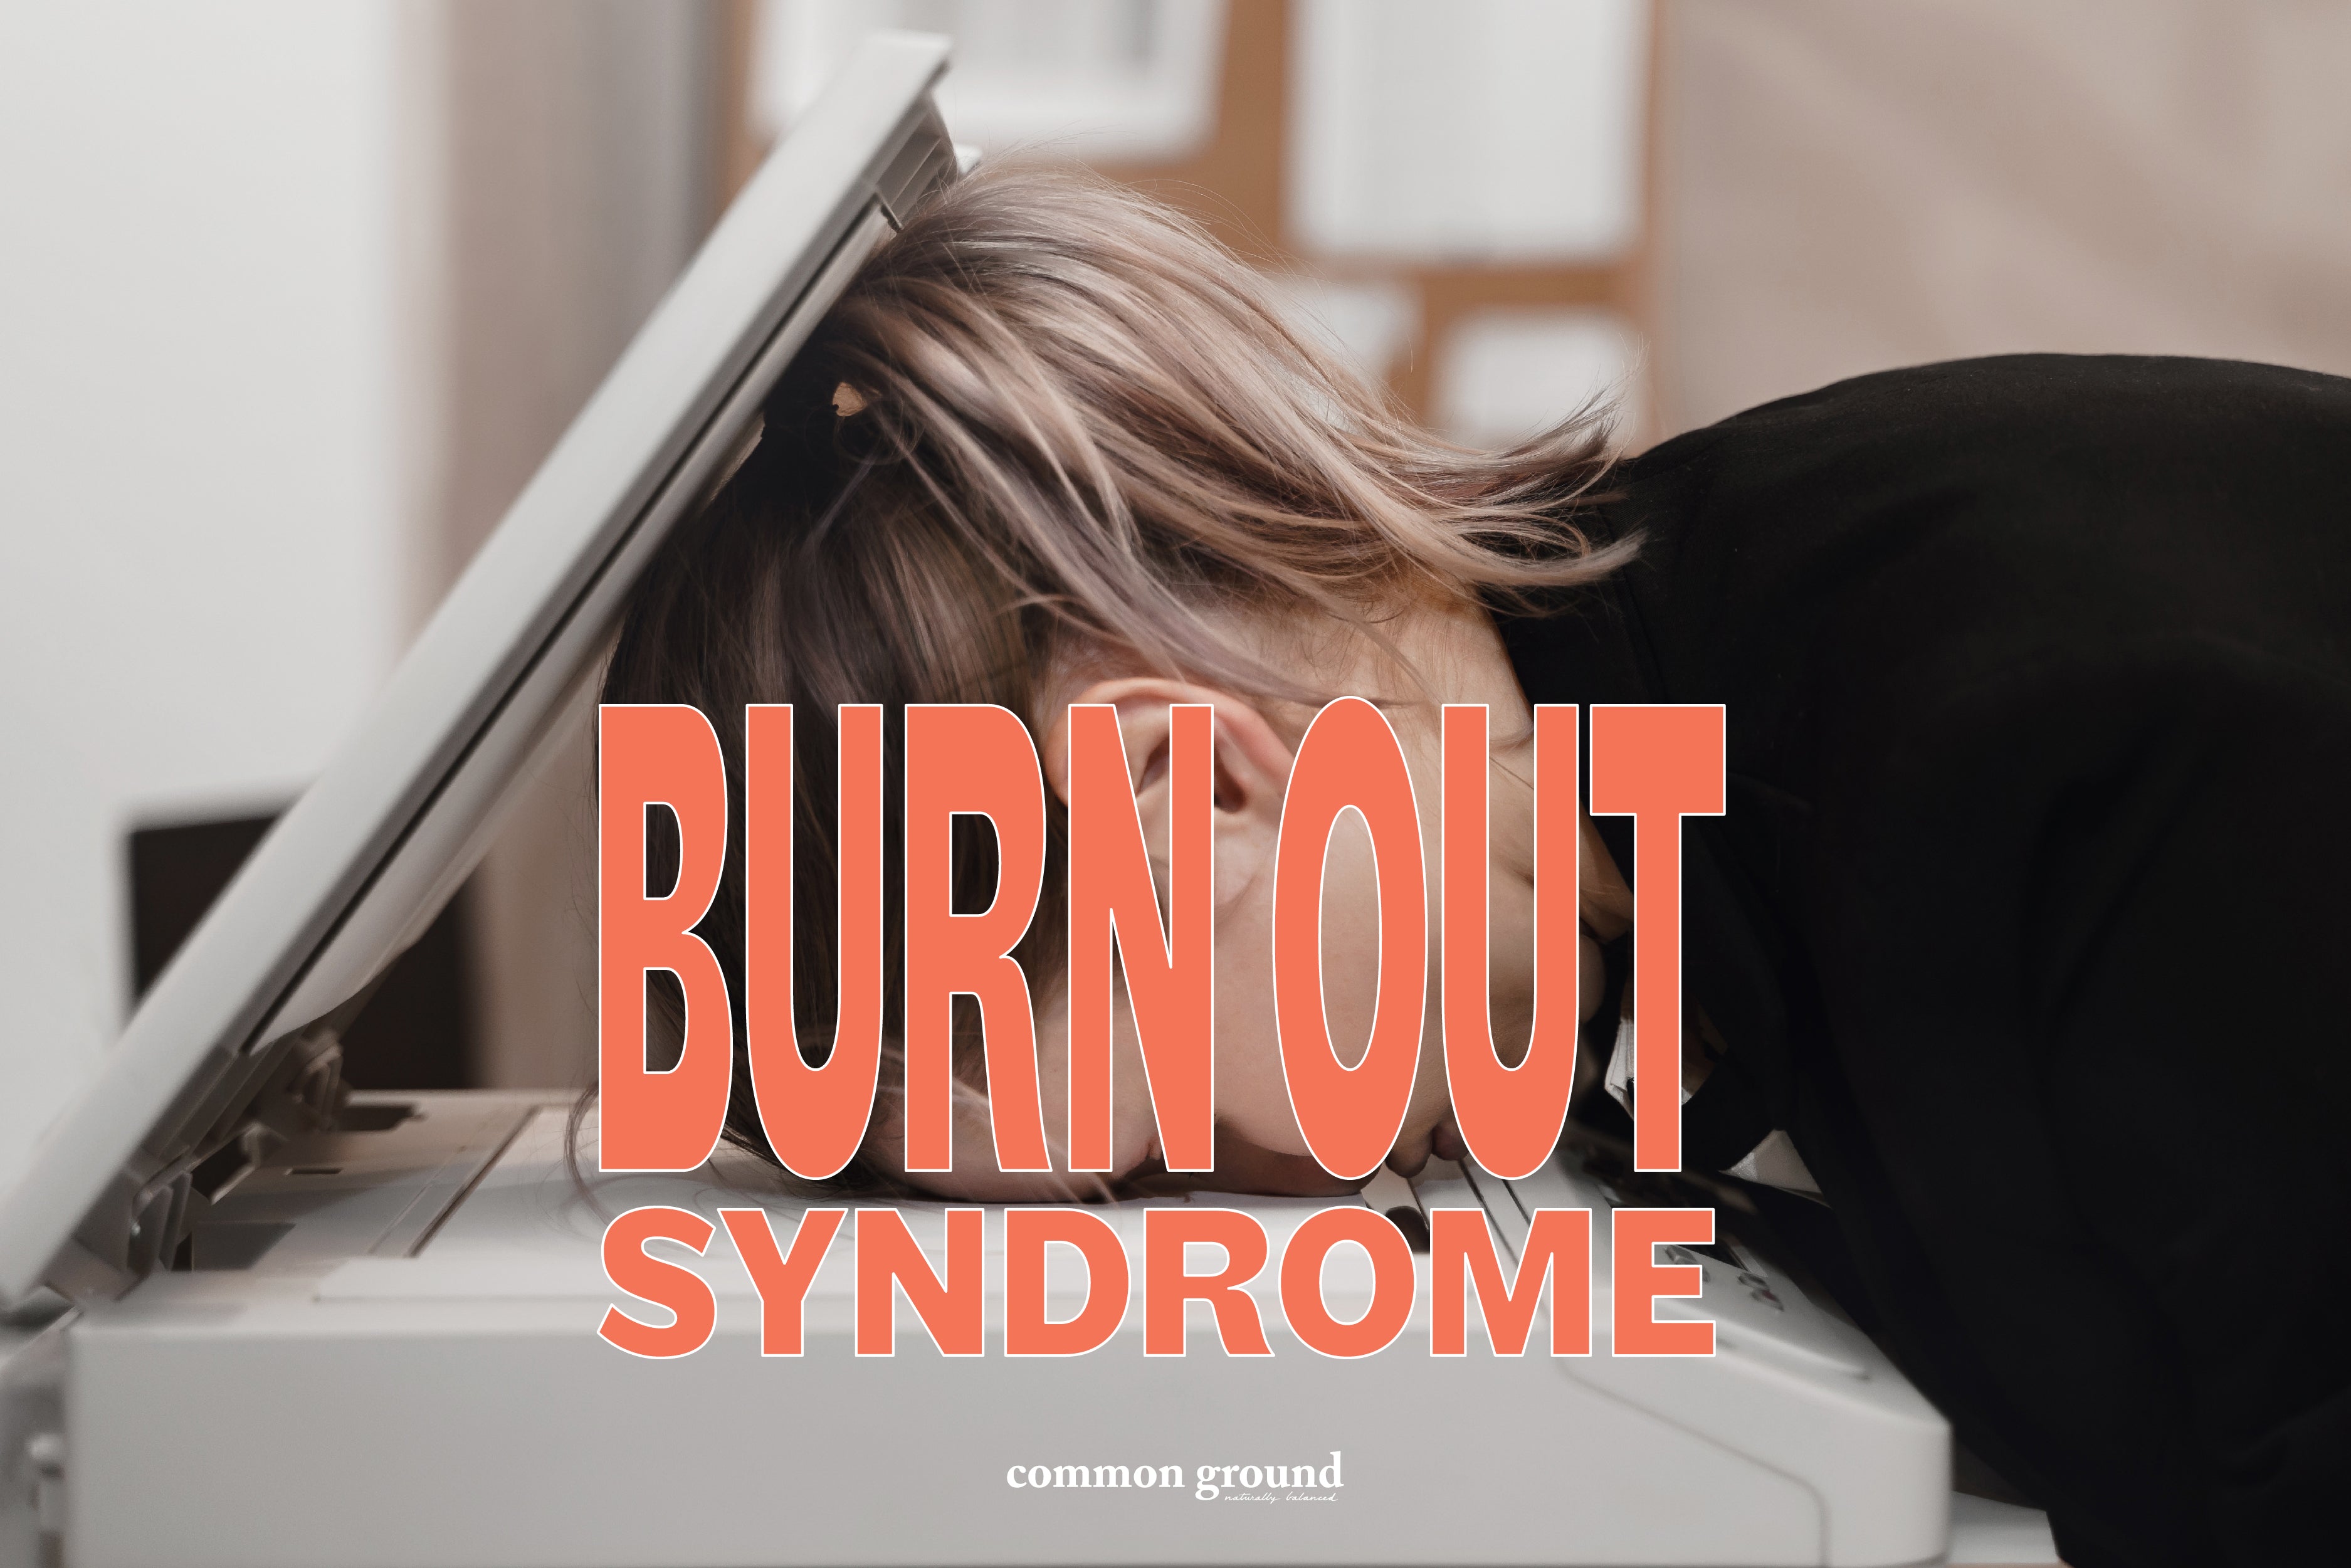 Burn out syndrome